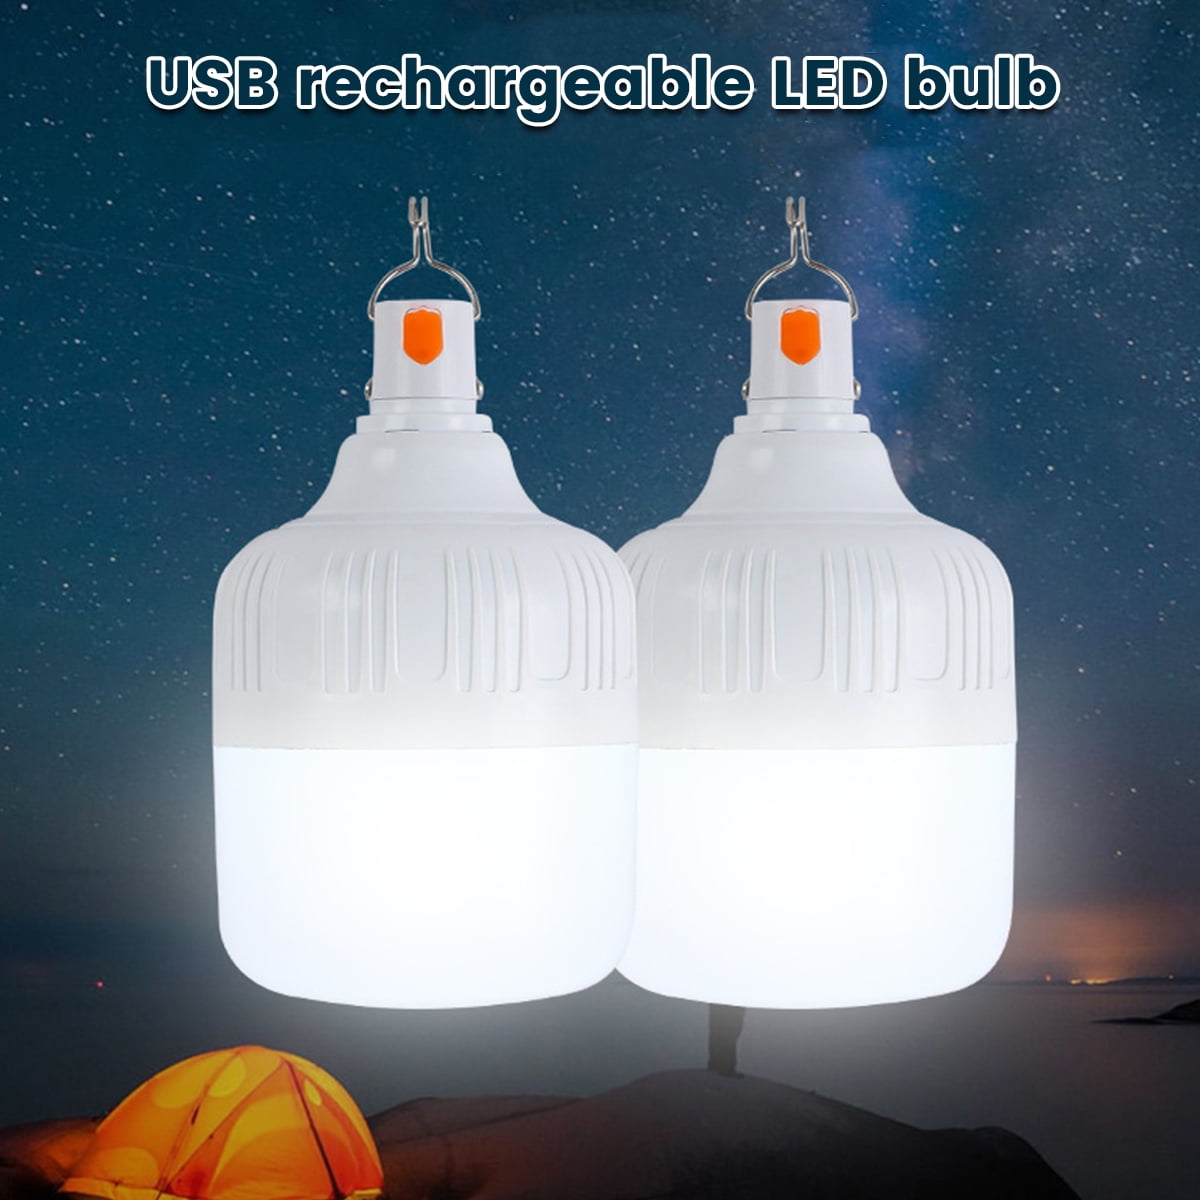 DABAOLUM Rechargeable Light Bulbs, 9W 3000K Emergency Light Bulbs, 1200mAh Battery  Operated Emergency Light Bulb E26/27 with Hook for Power Failure, Power  Outage, Camping,6pcs 